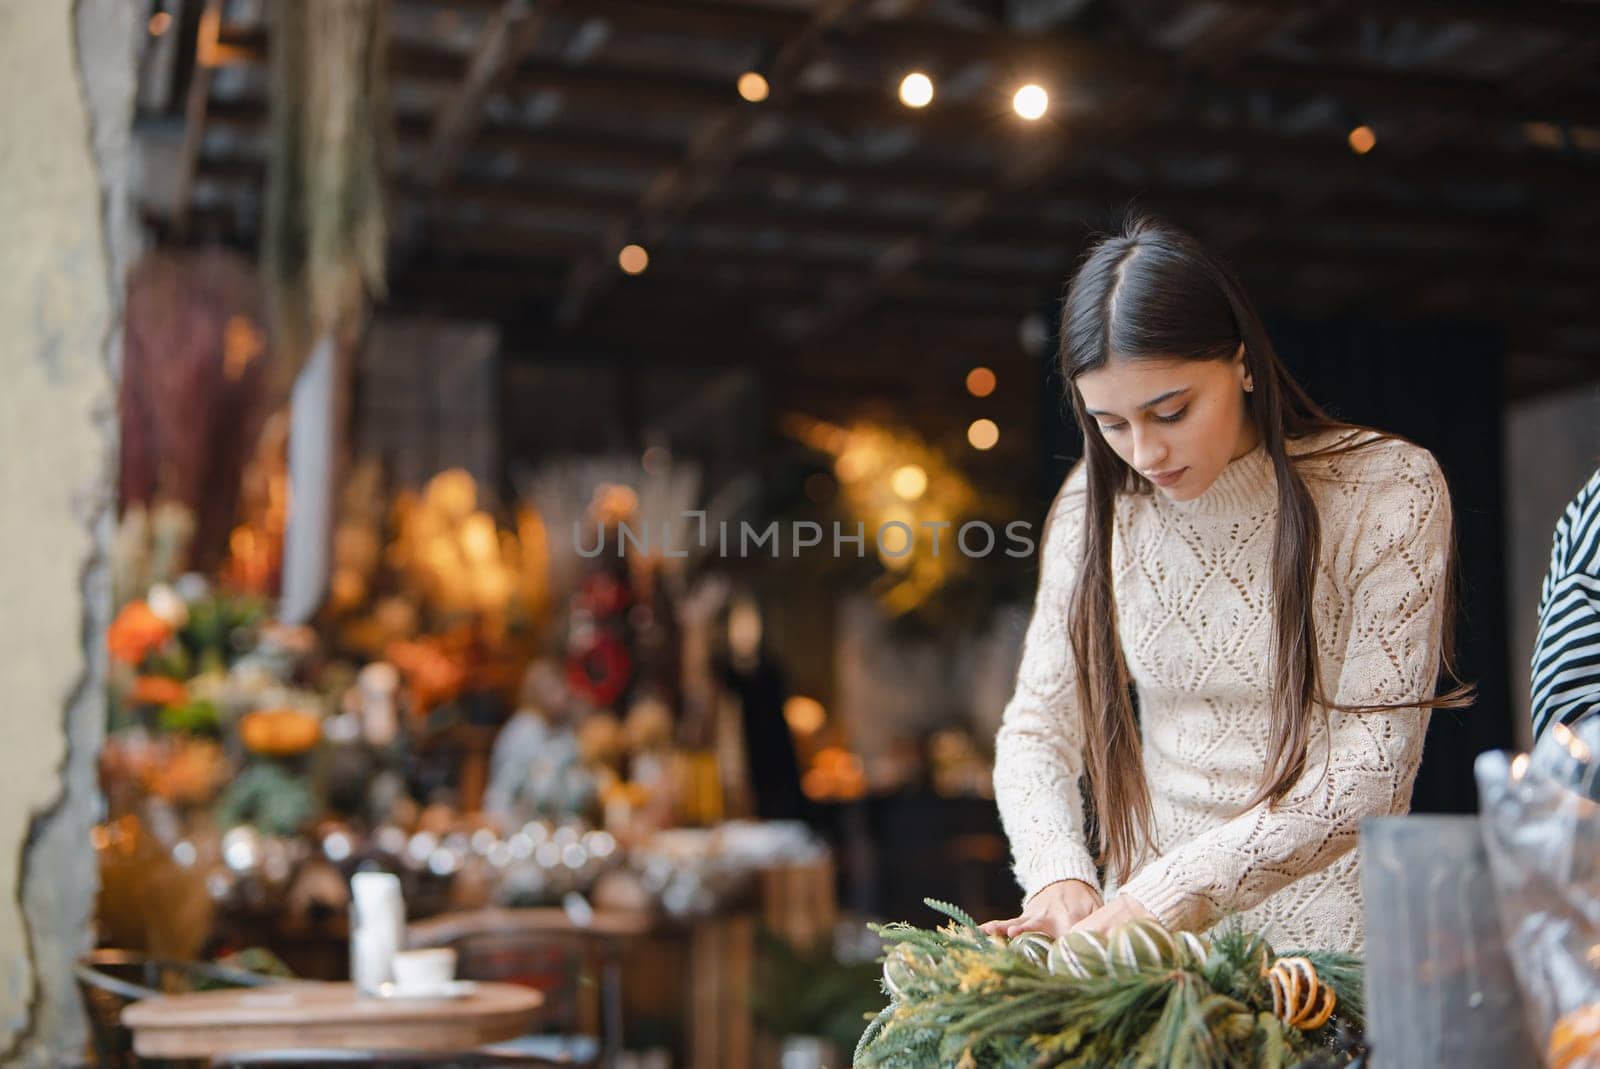 The final stages of crafting the Christmas wreath showcased on the flower shop counter. by teksomolika